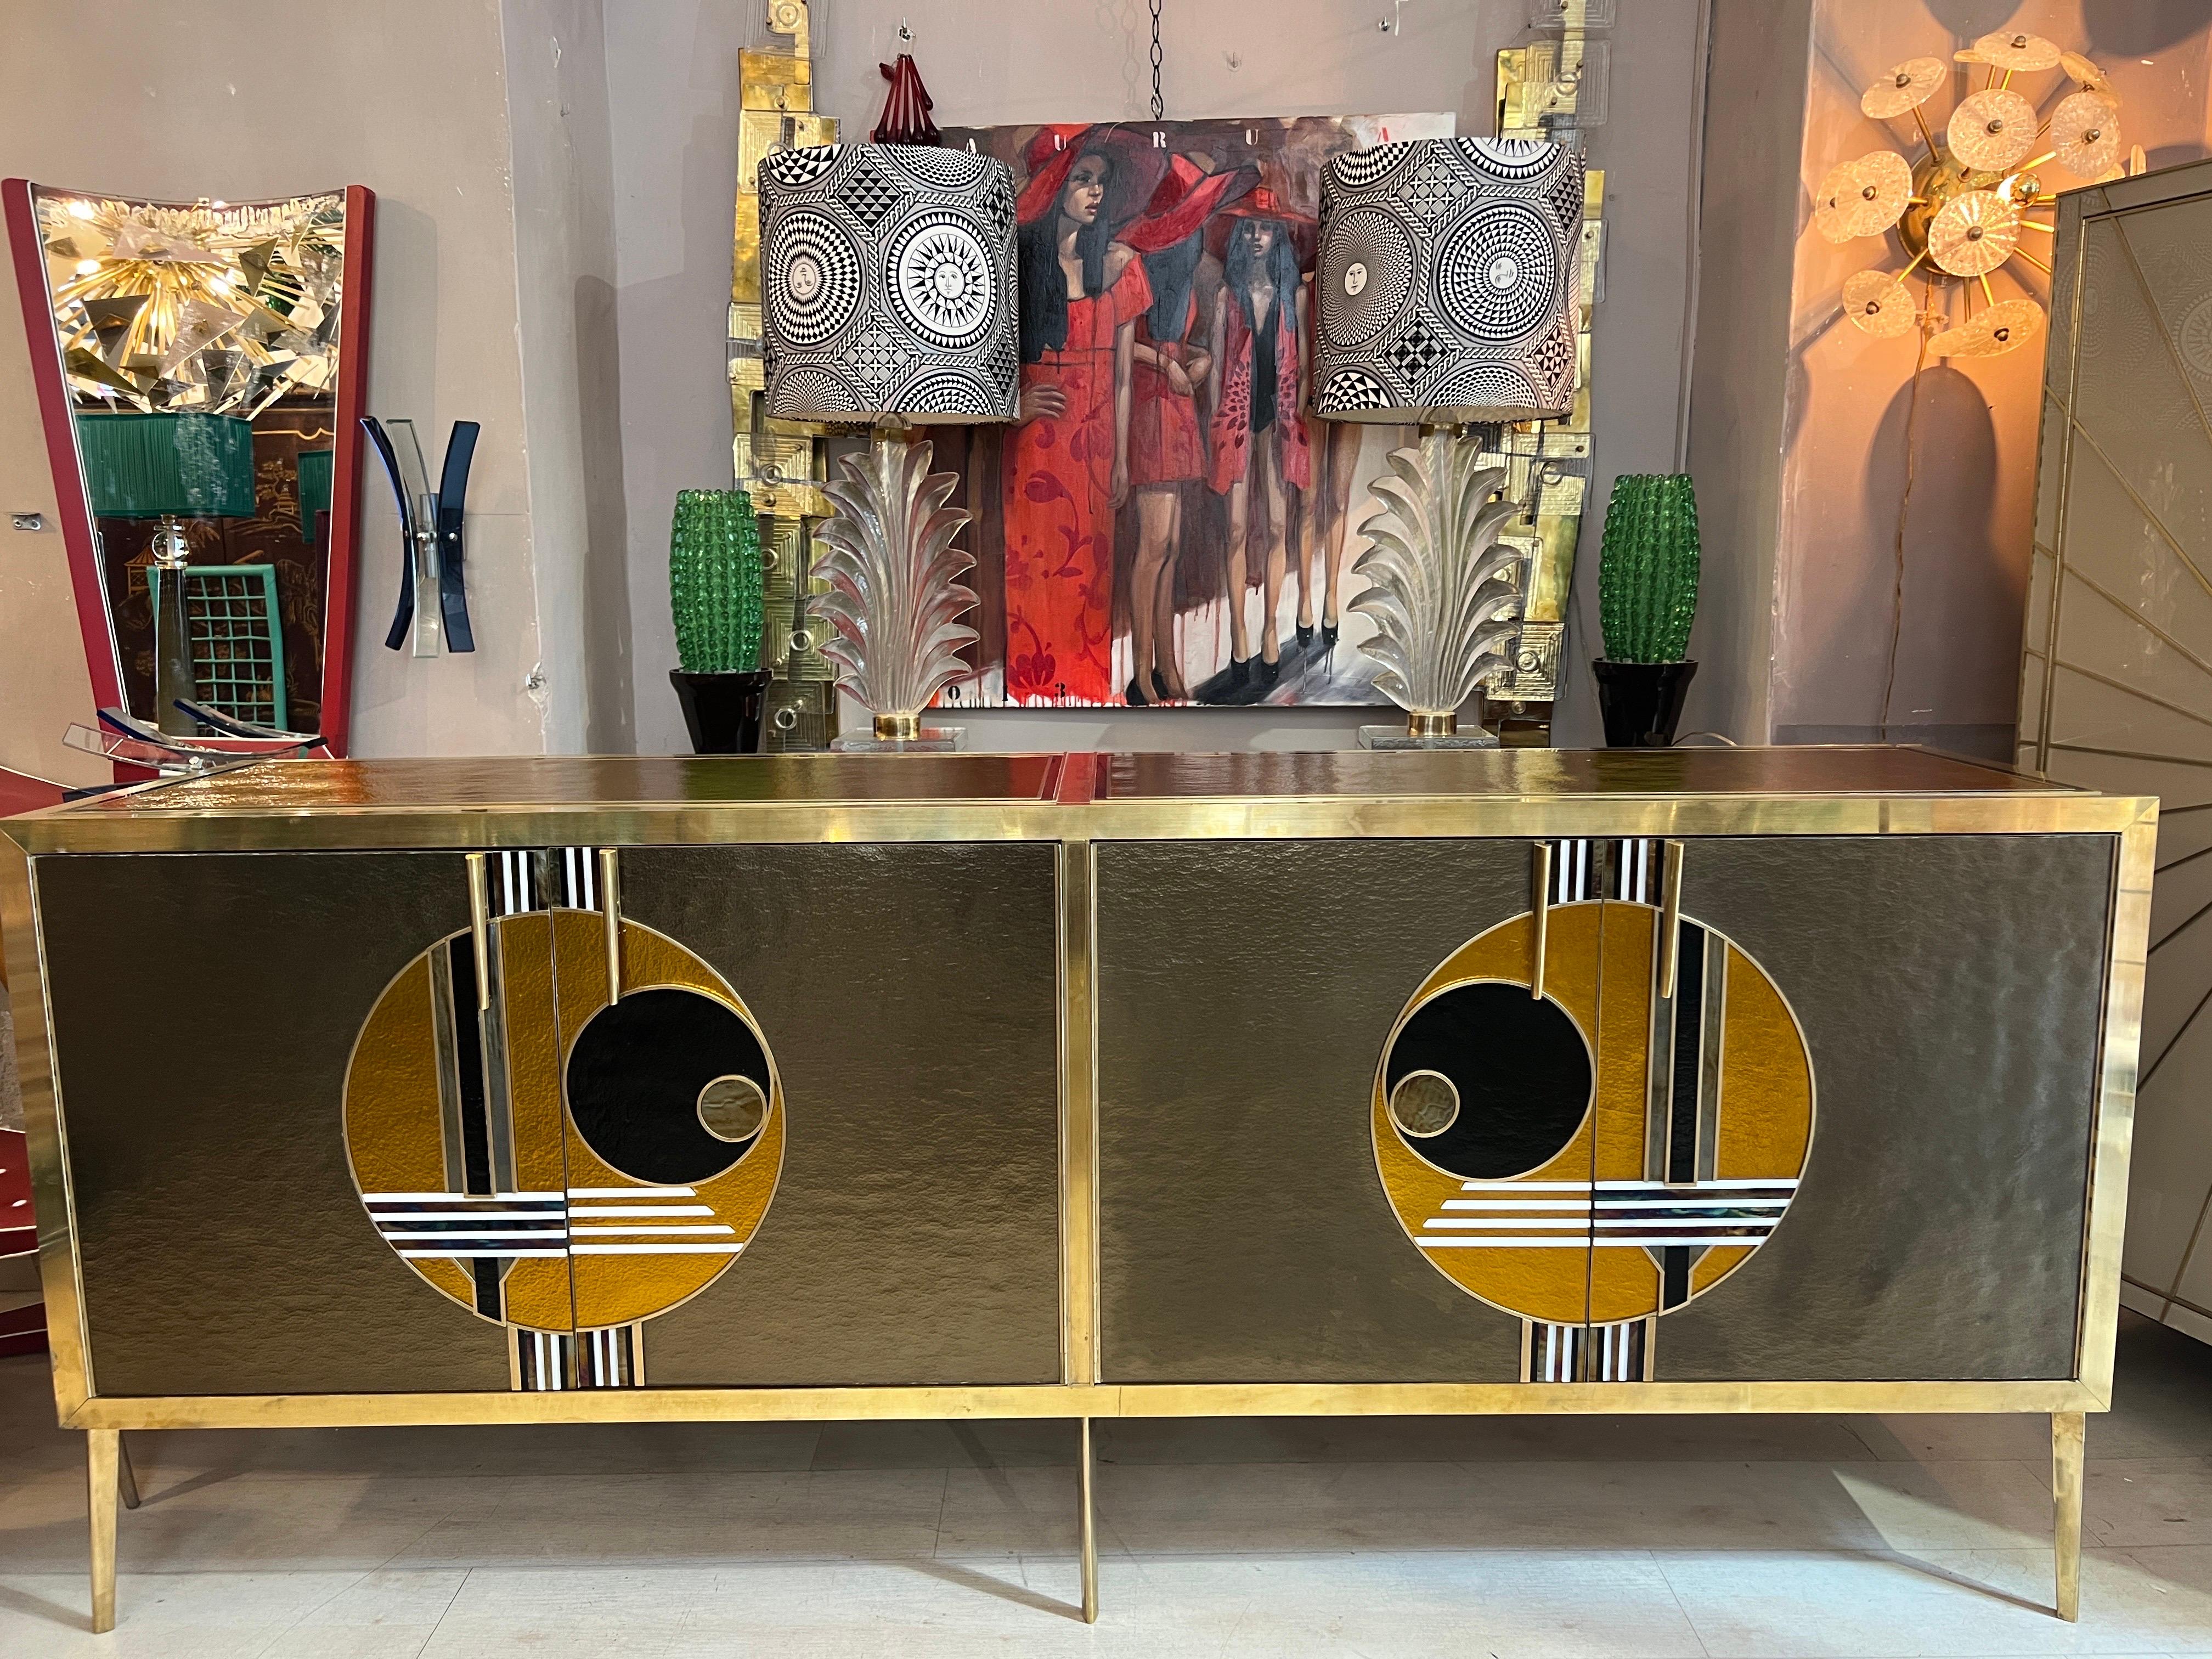 Vintage Italian Bronze and Gold Opaline glass credenza with 4 doors with shelf inside. Front Door with two geometric modern designs in brass edges with multicolored opaline glass (bronze, gold, black, white and iridescent).
The inside has been newly